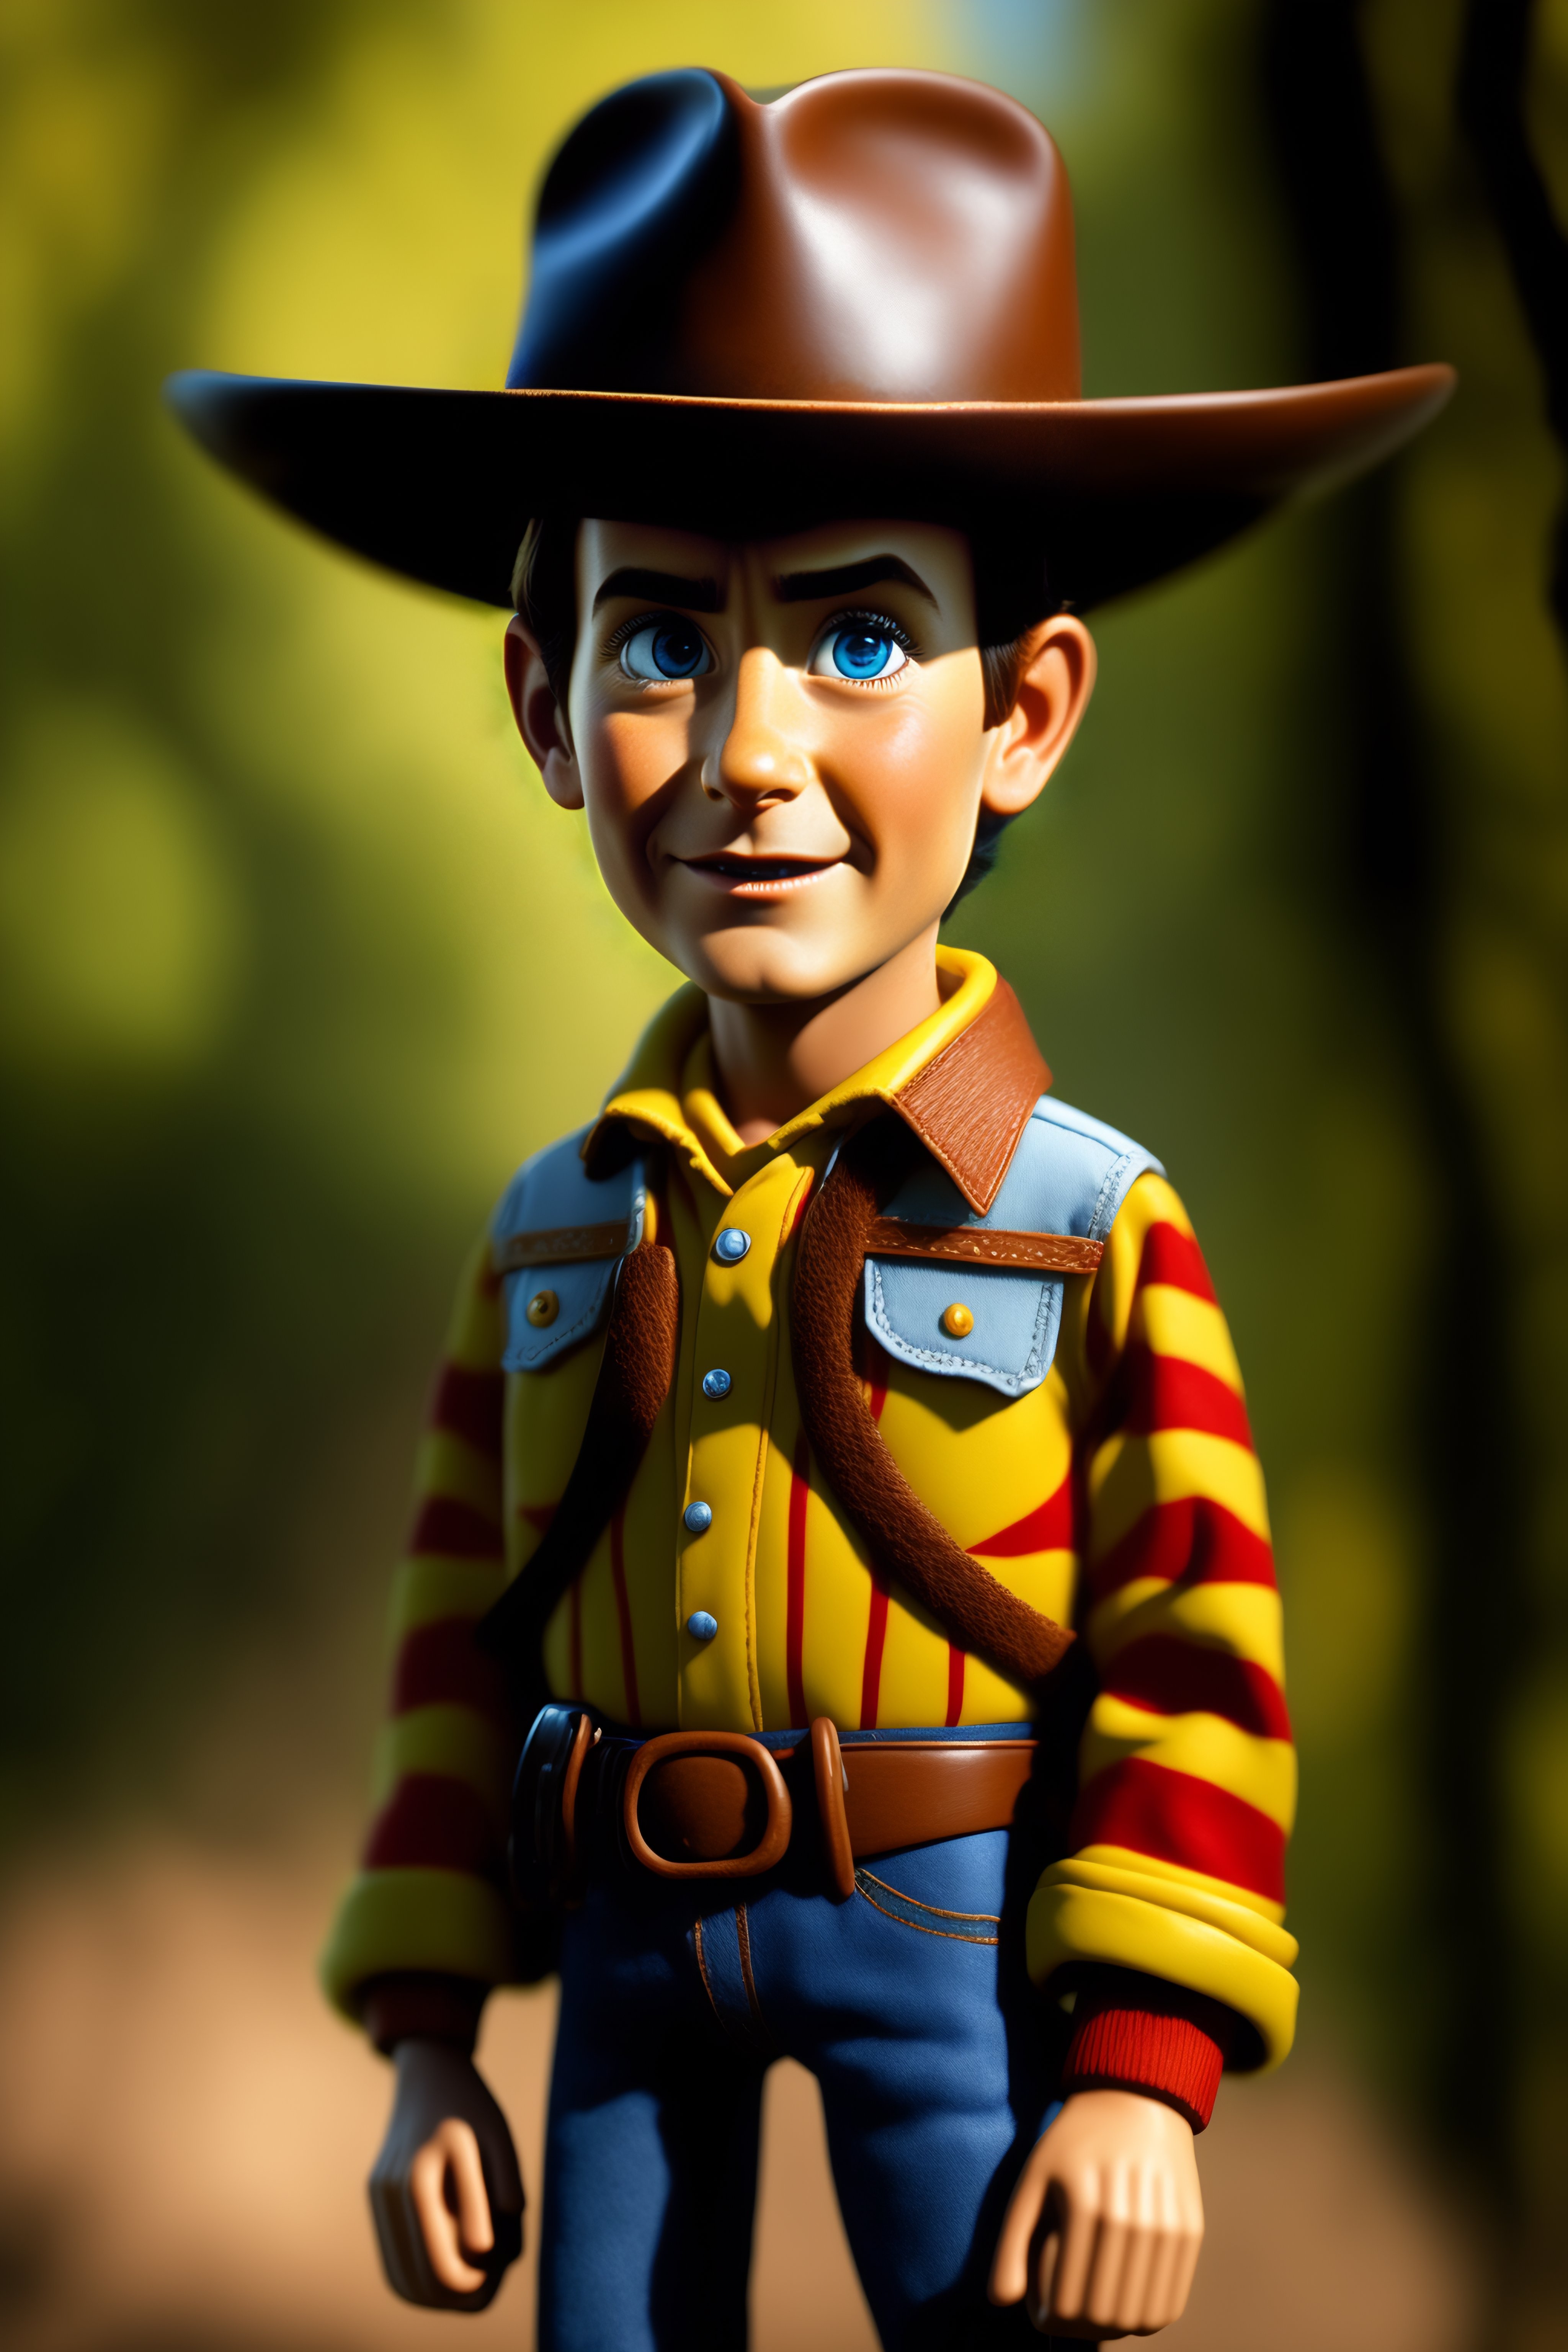 Lexica - Real life Woody from Toy Story, photorealistic